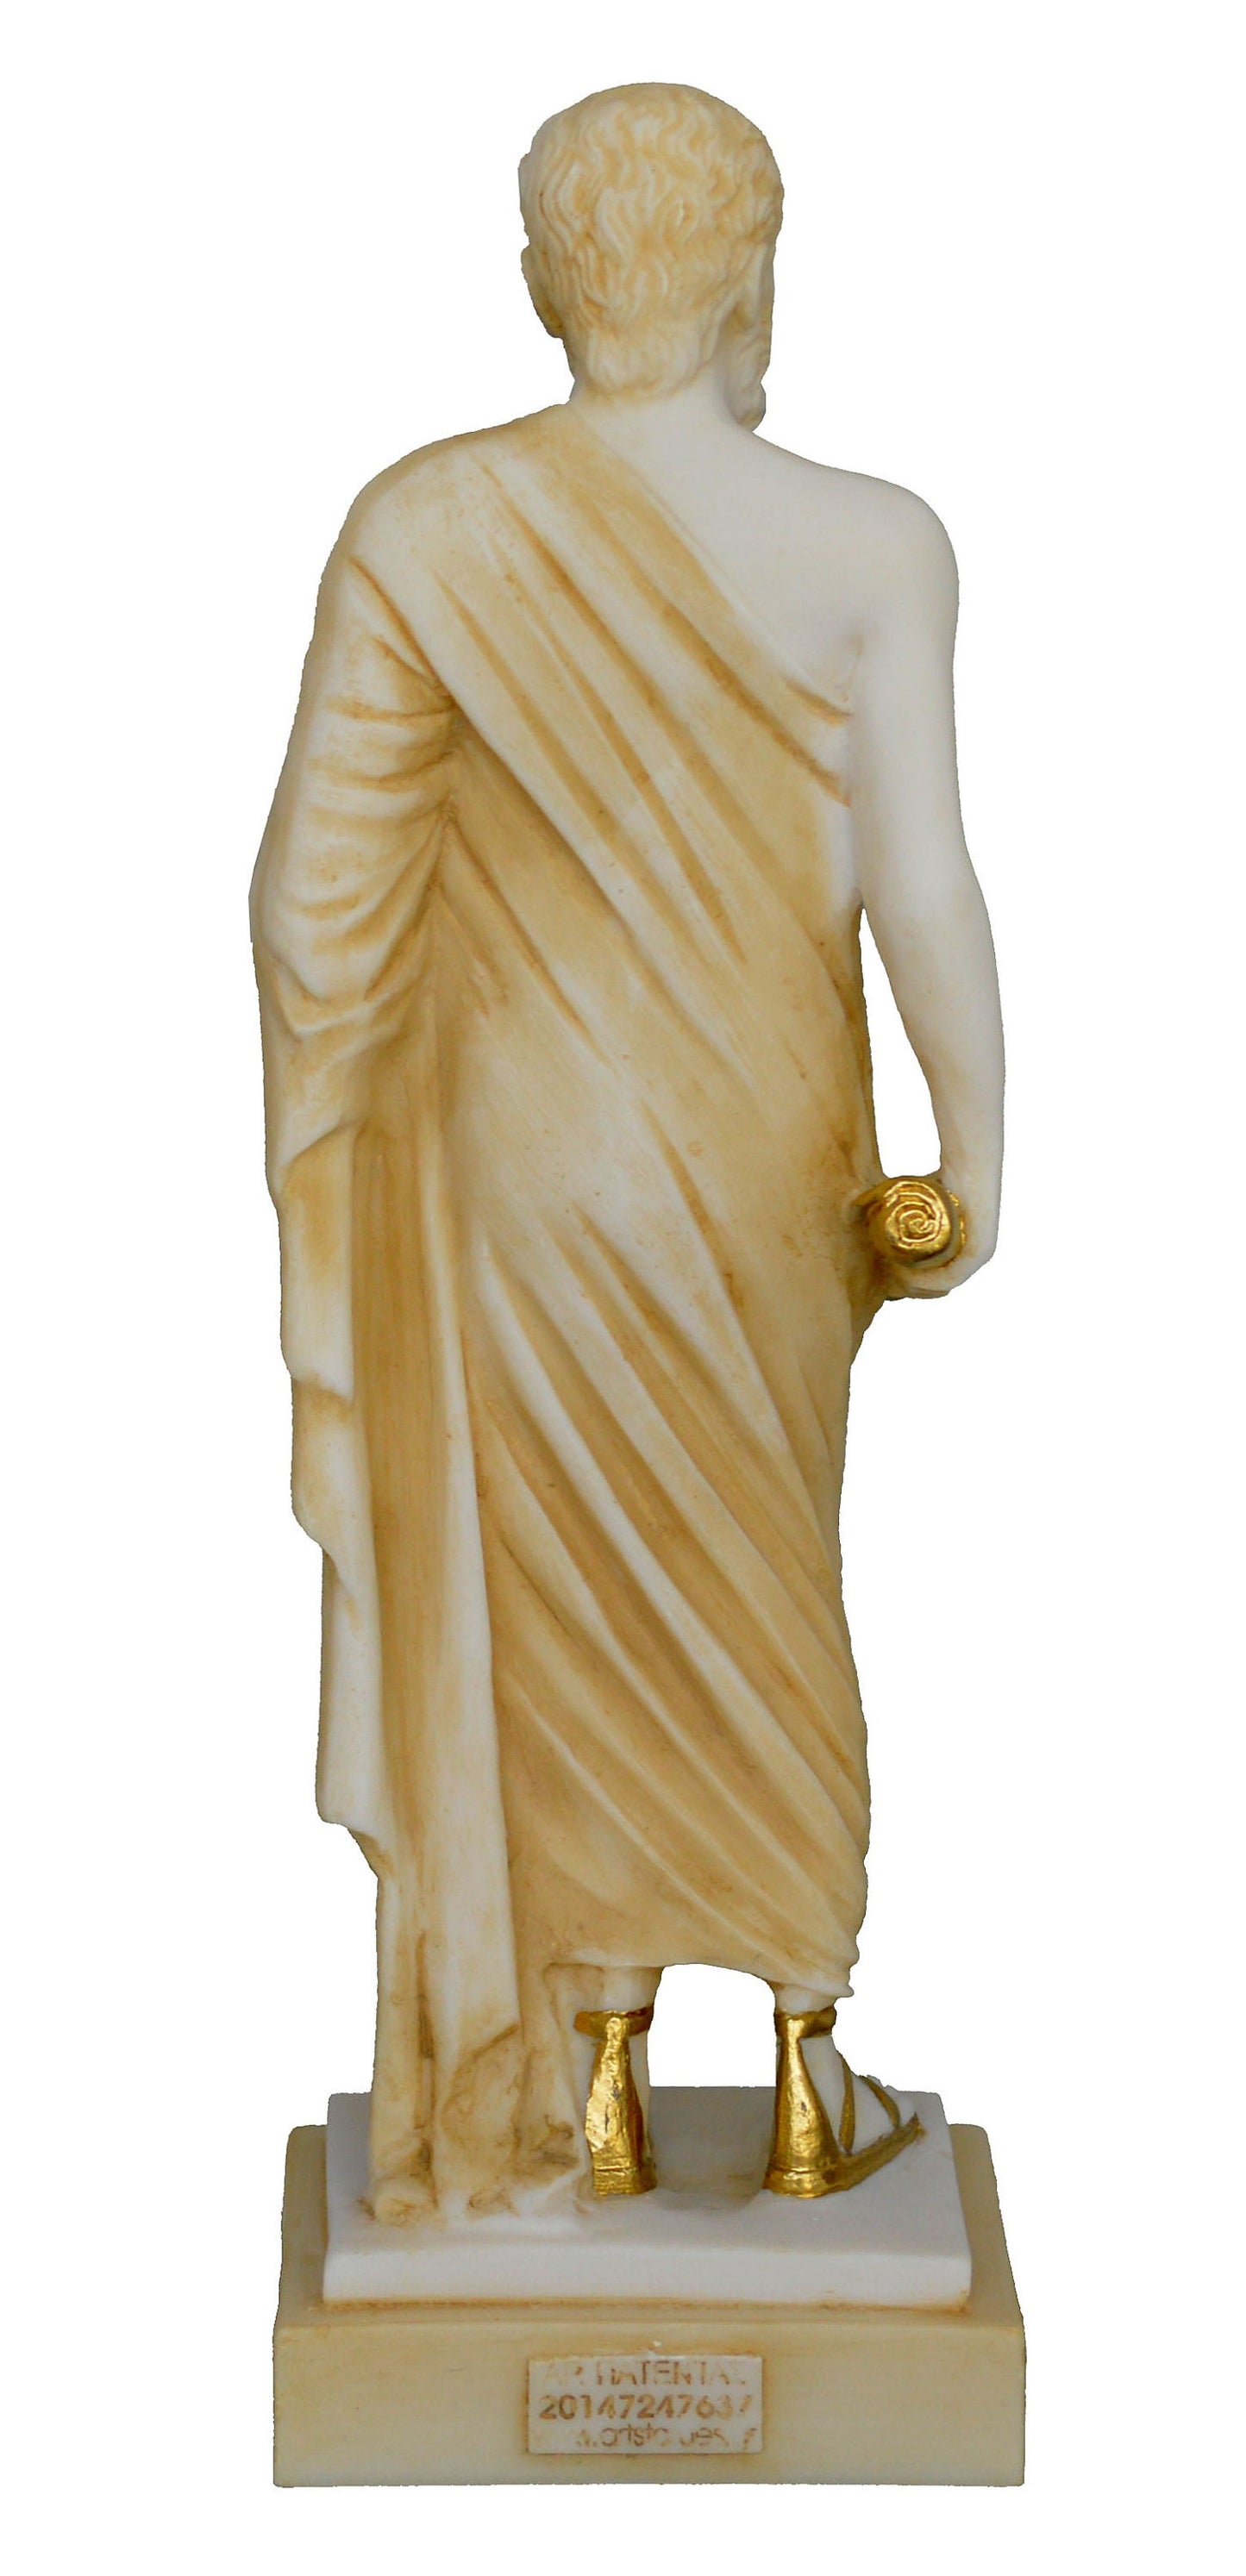 Socrates - Ancient Greek philosopher - Founder of Western Philosophy - First Moral Philosopher - Aged Alabaster Statue Sculpture